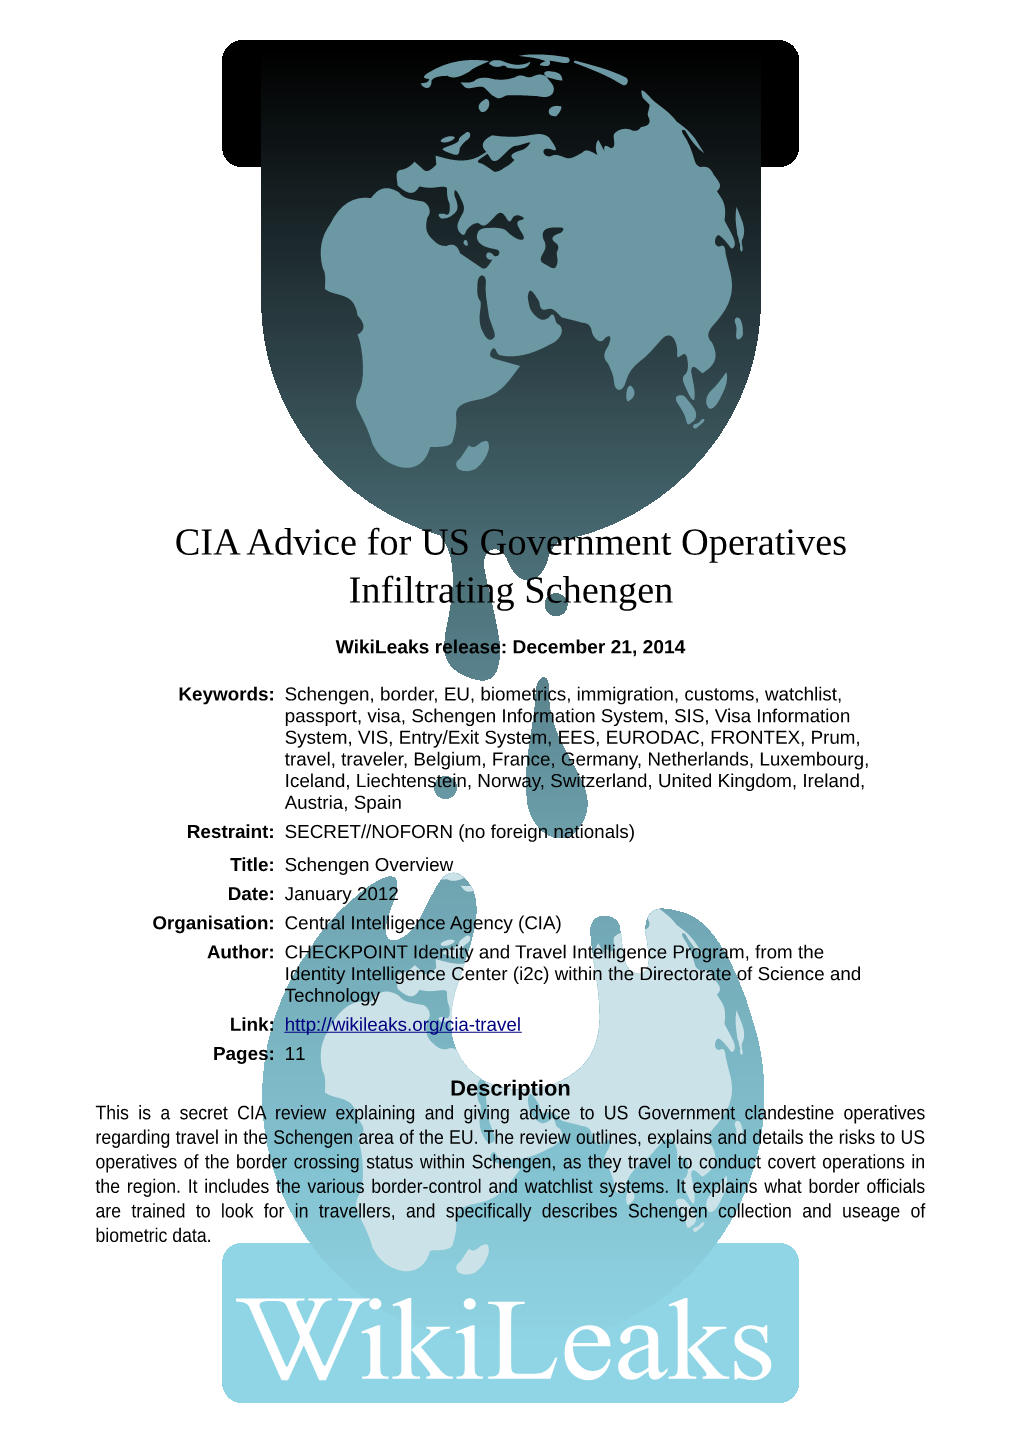 CIA Advice for US Government Operatives Infiltrating Schengen